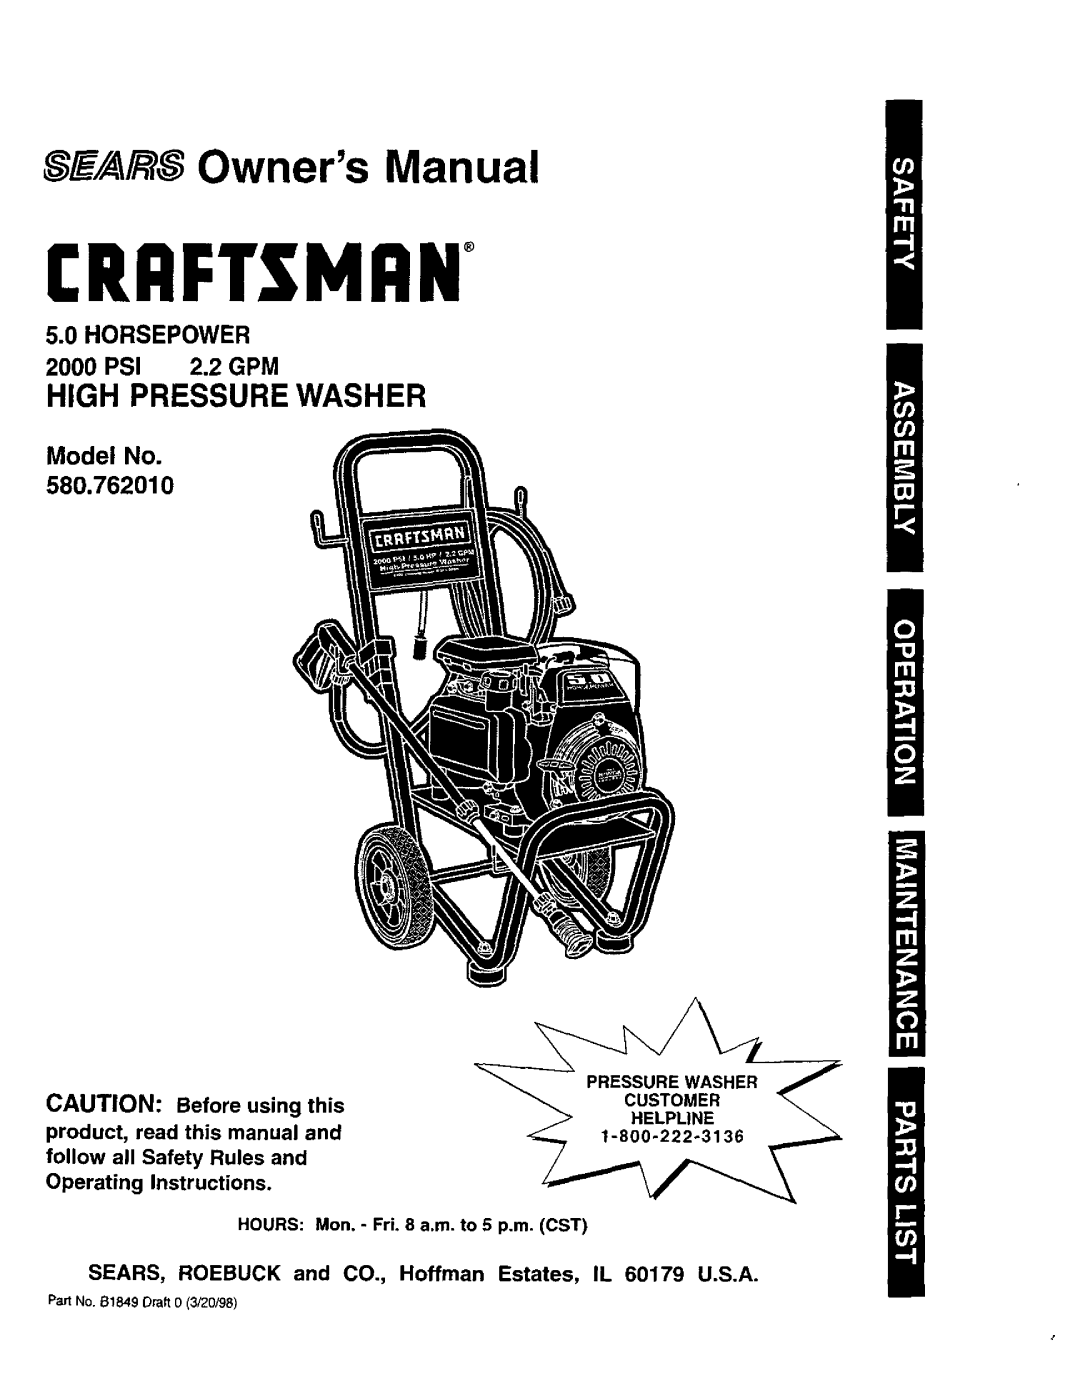 Craftsman 580.76201 owner manual HORSEPOWER 2000 PSI 2.2 GPM, Model No, CRRFT$1dRN, OwnersManual, He.Ipune, this 